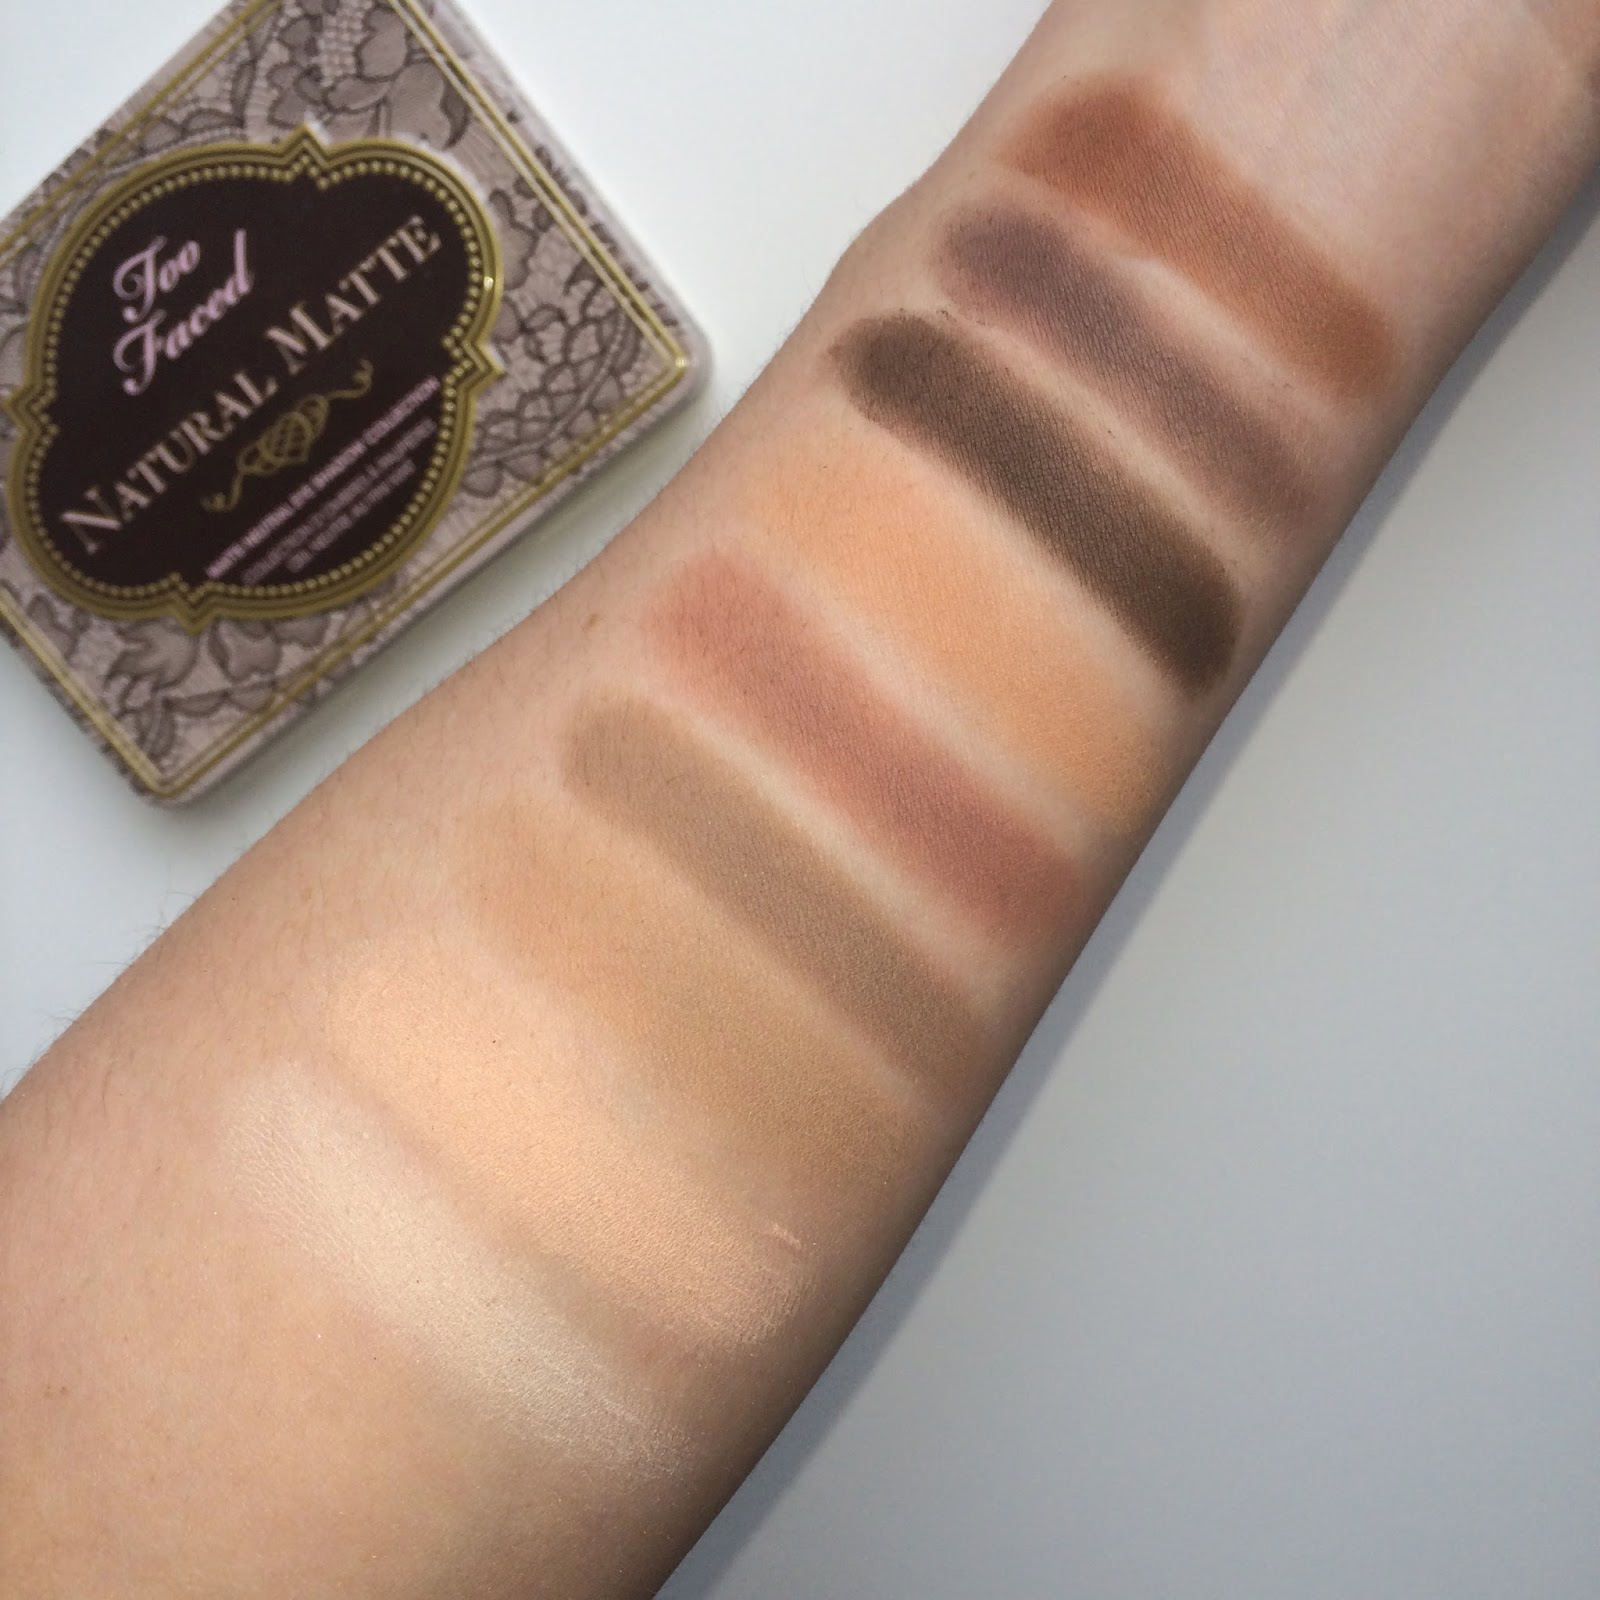 Too Faced Natural Matte Palette review with swatches on fair skin